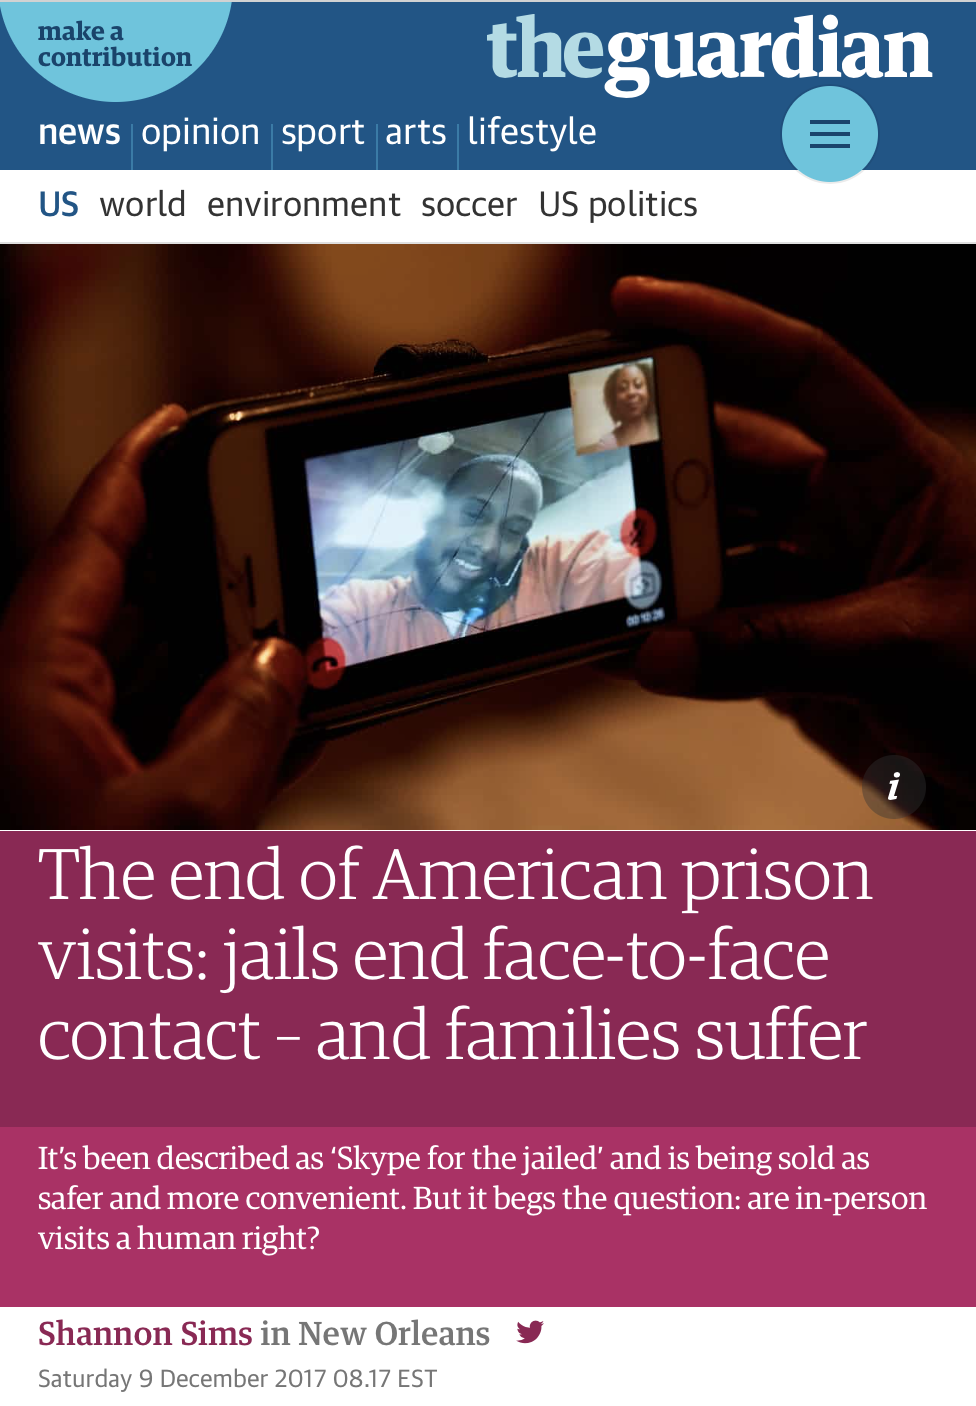 The end of American prison visits